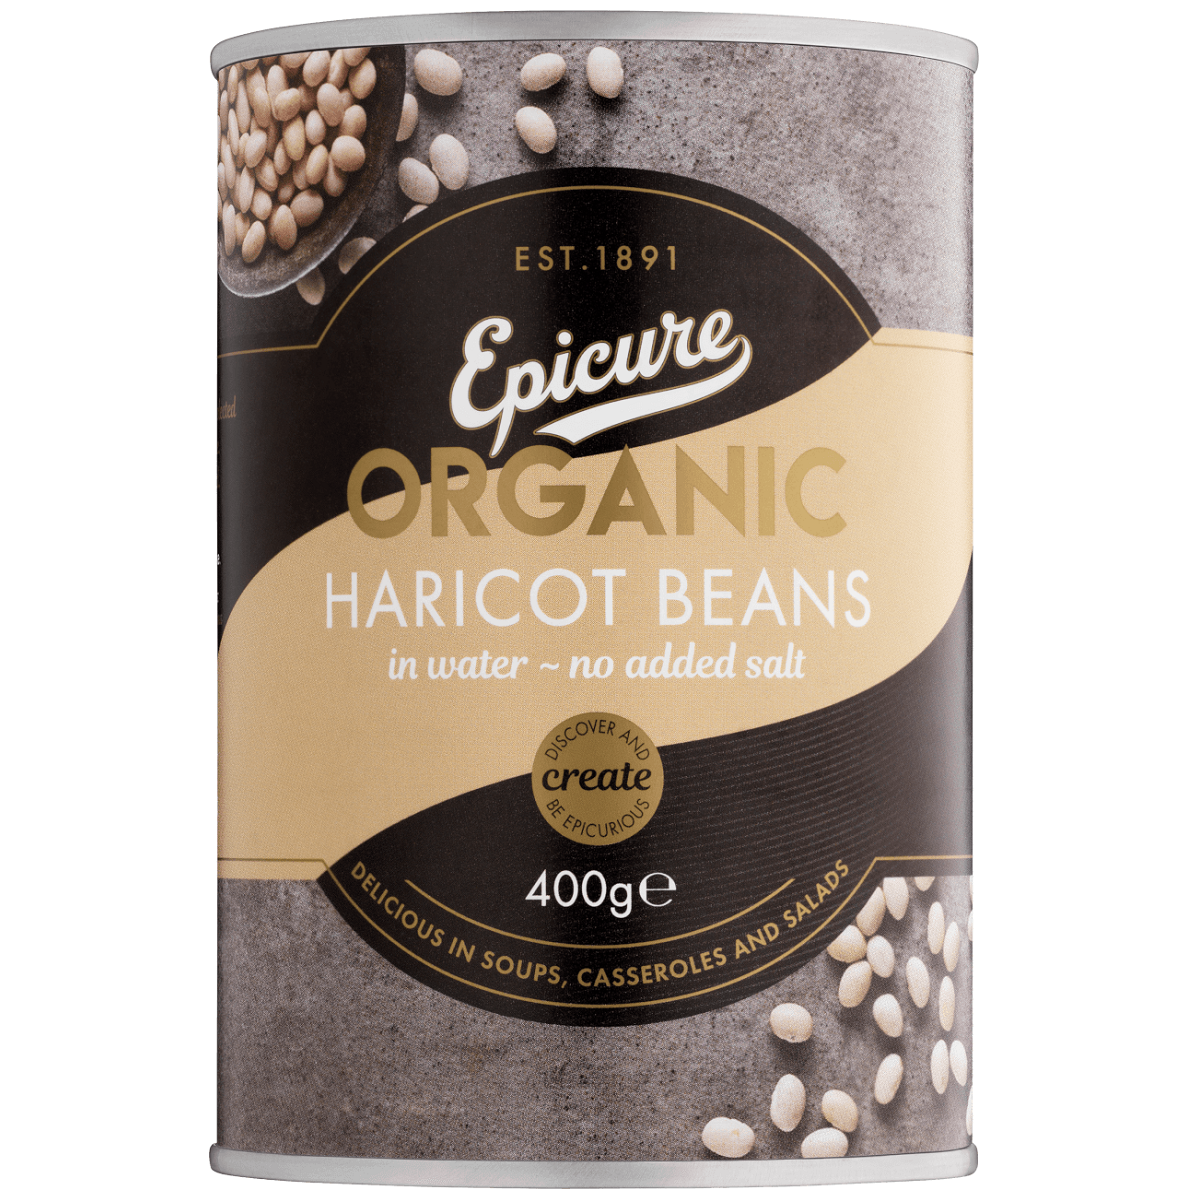 Epicure Organic Haricot Beans in water no added salt 400g